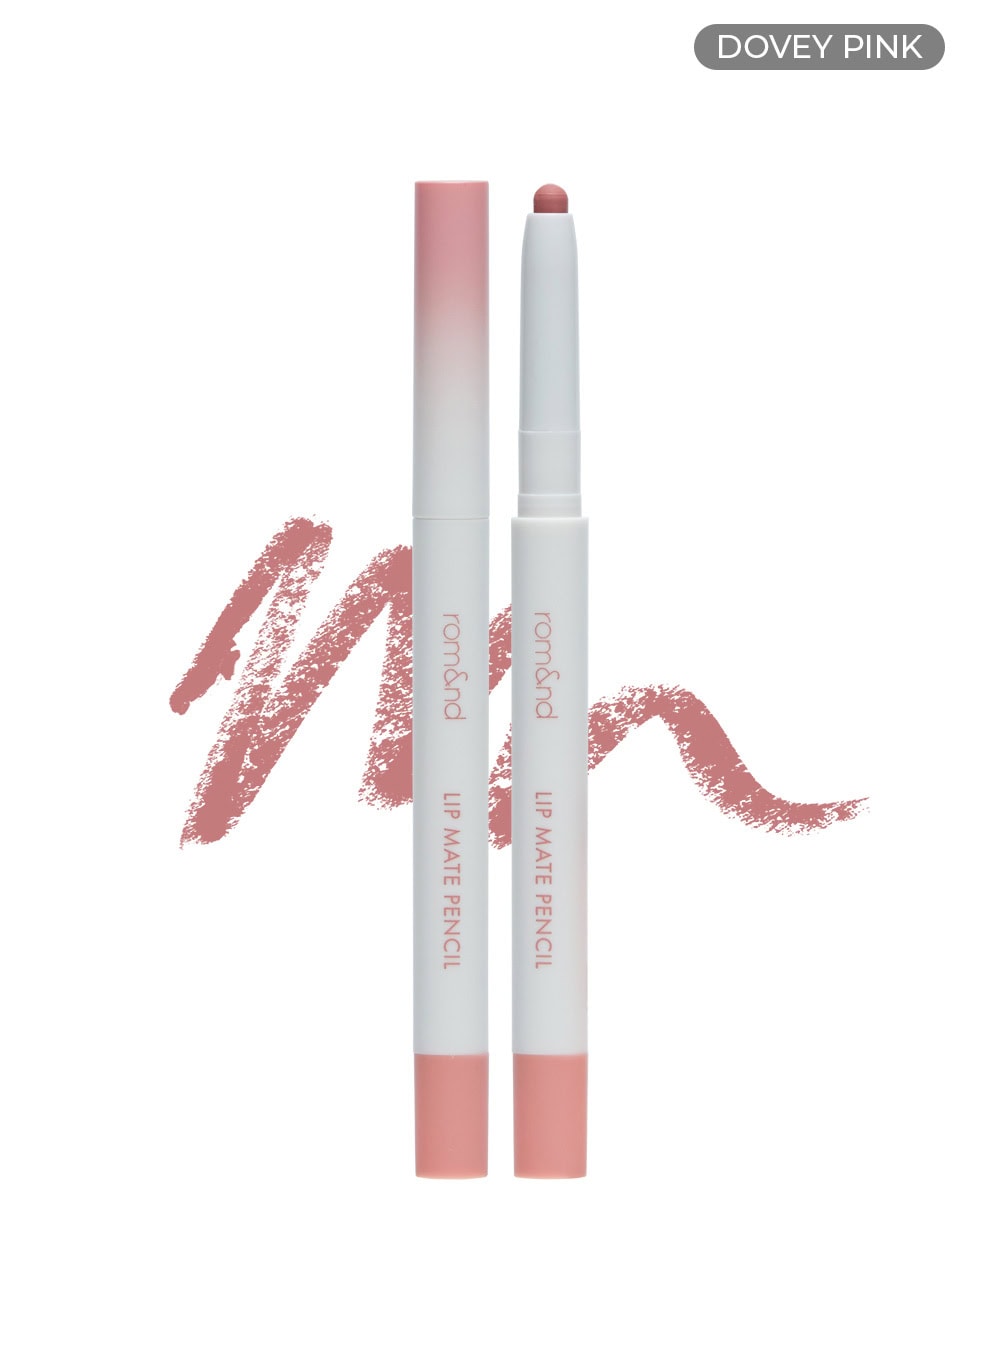 Lip Mate Pencil (0.5g) - 02 DOVEY PINK